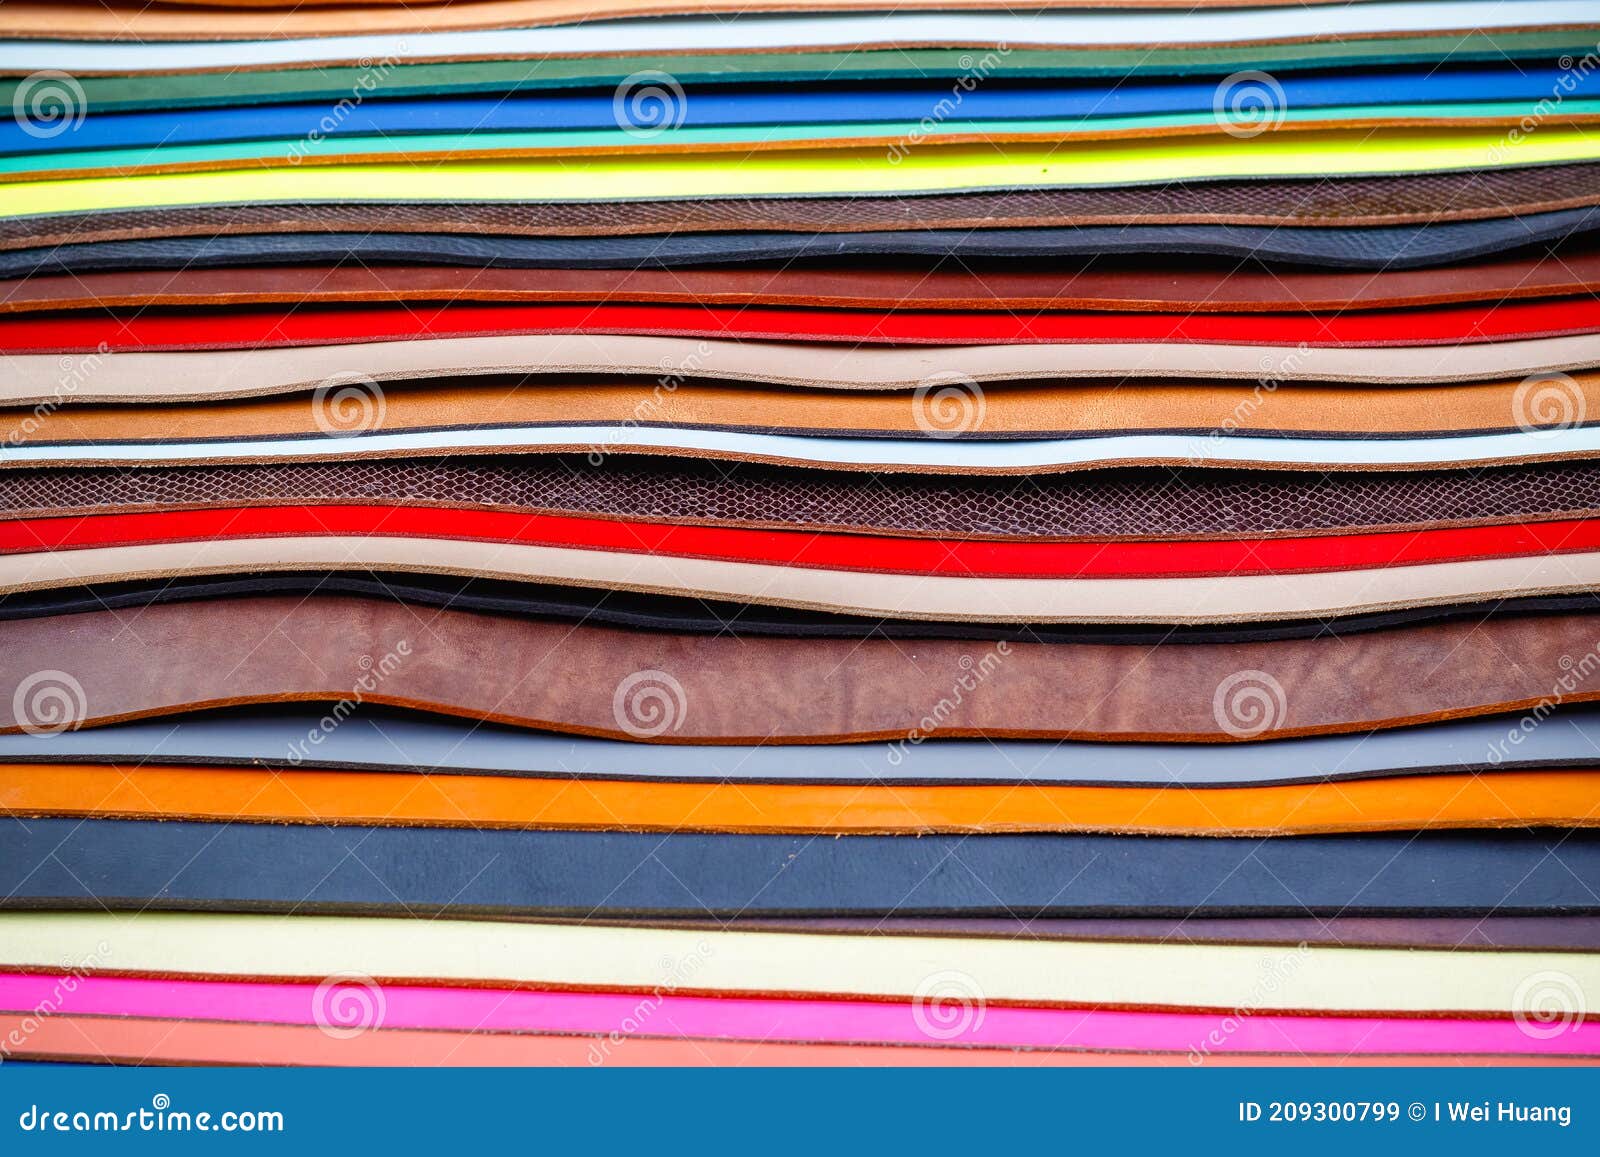 colourful leathers on display at camden market